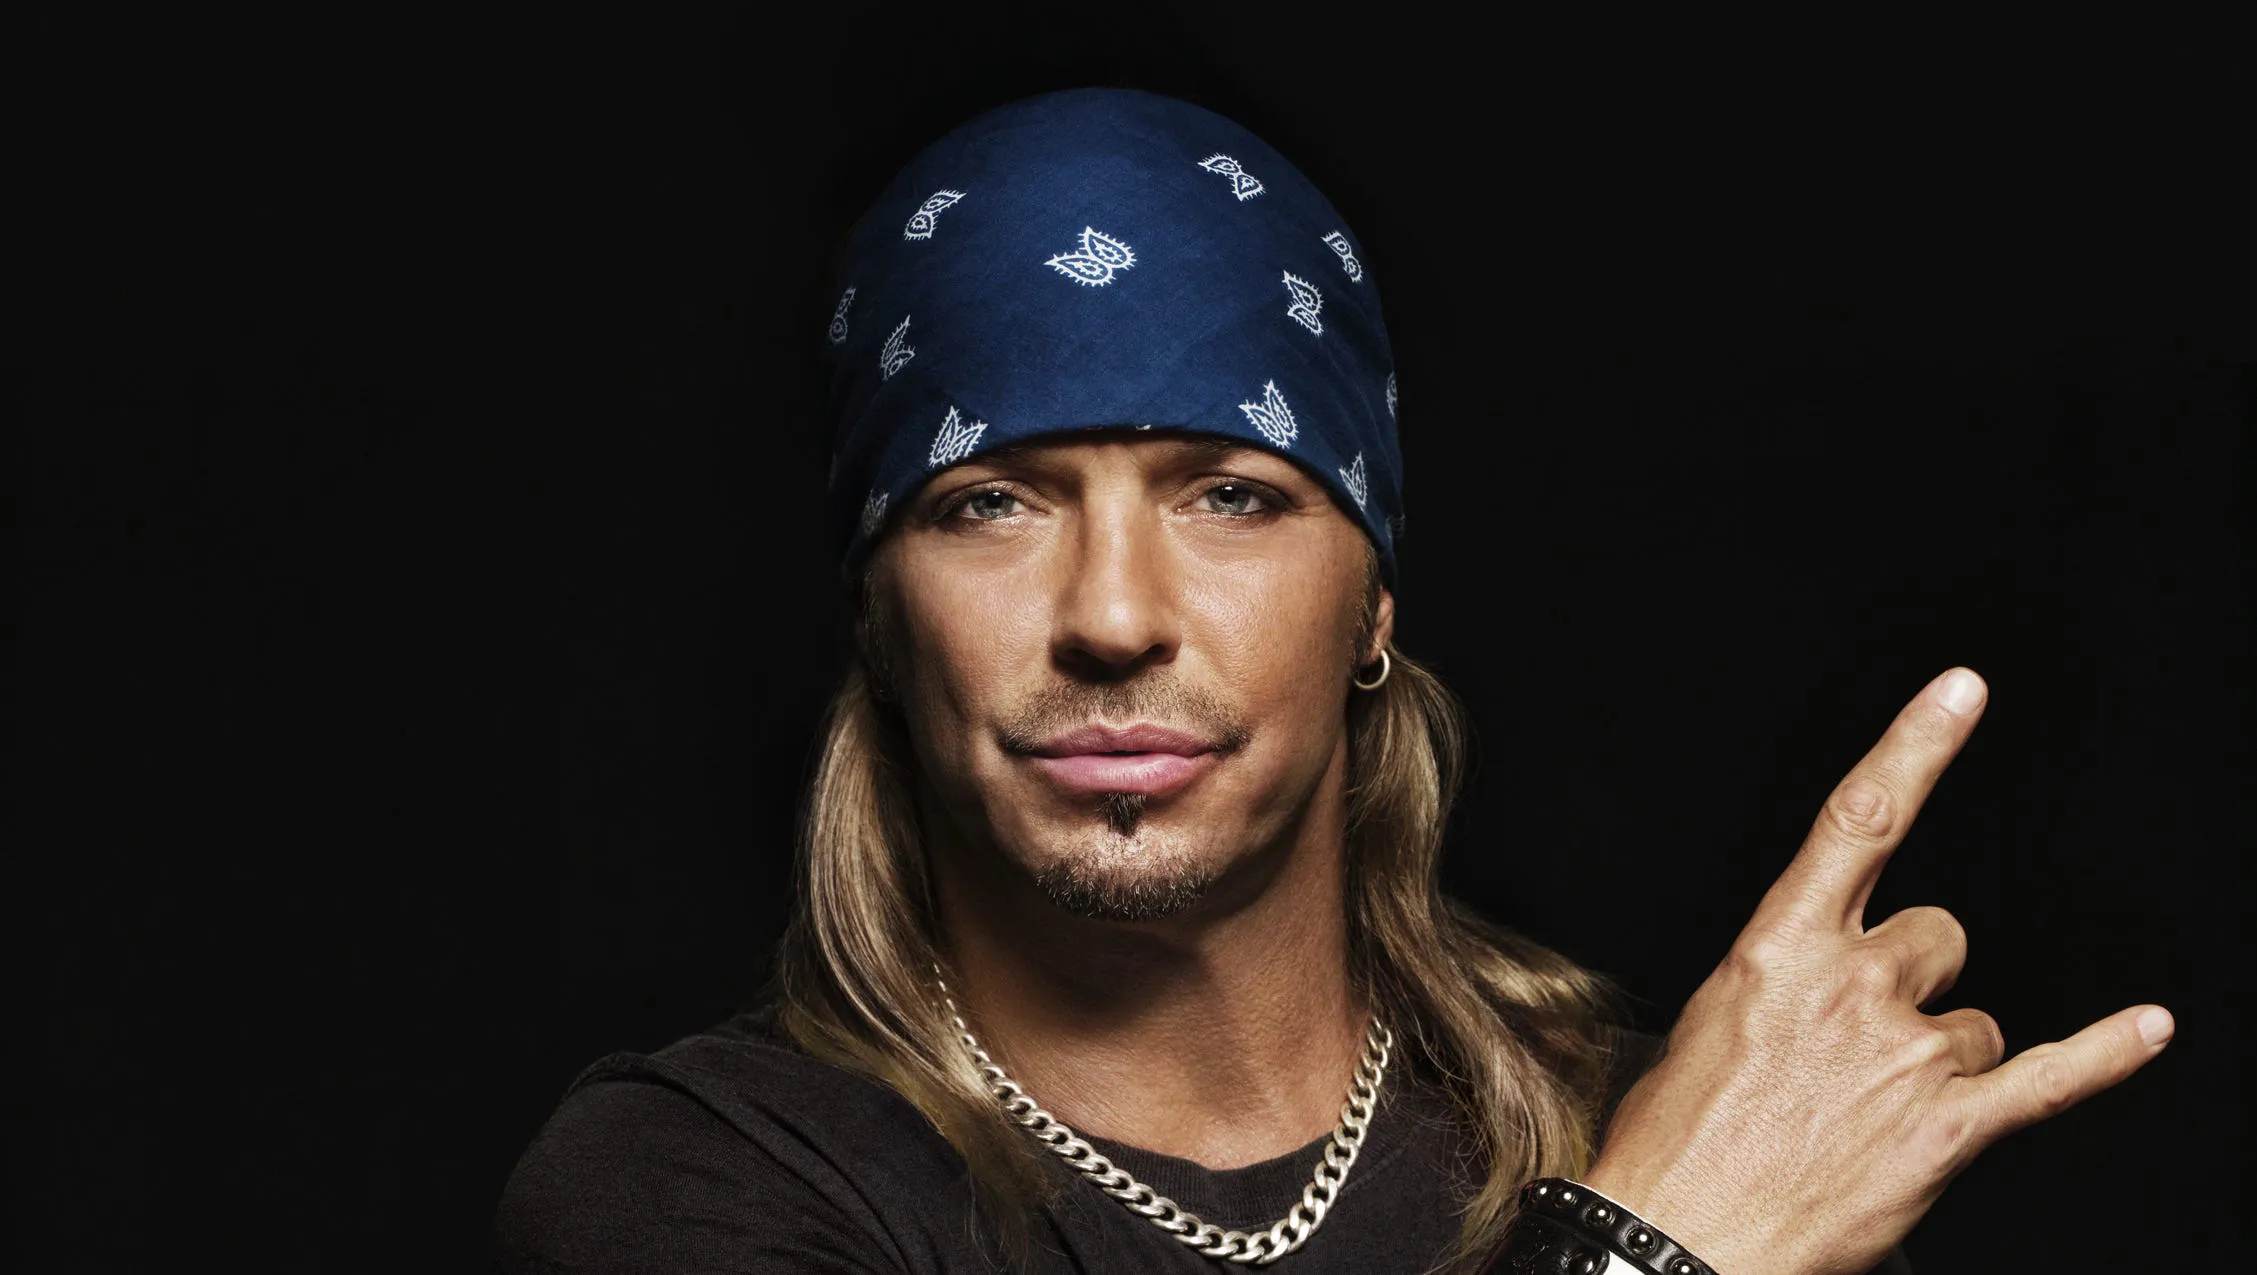 Bret Michaels Early life & Career